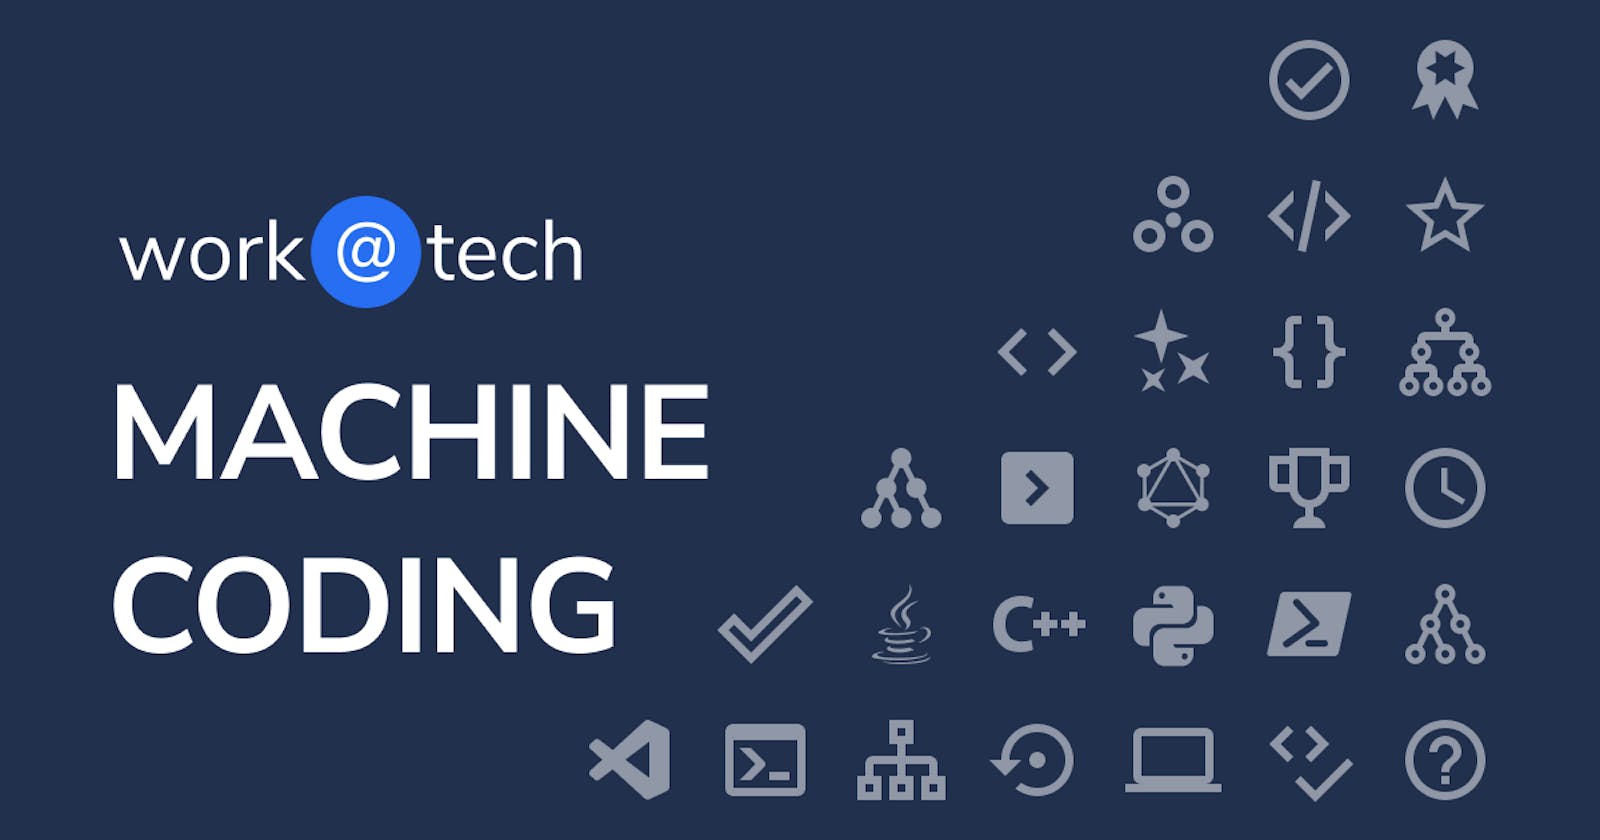 Dive into Our Exclusive Machine Coding Challenge!